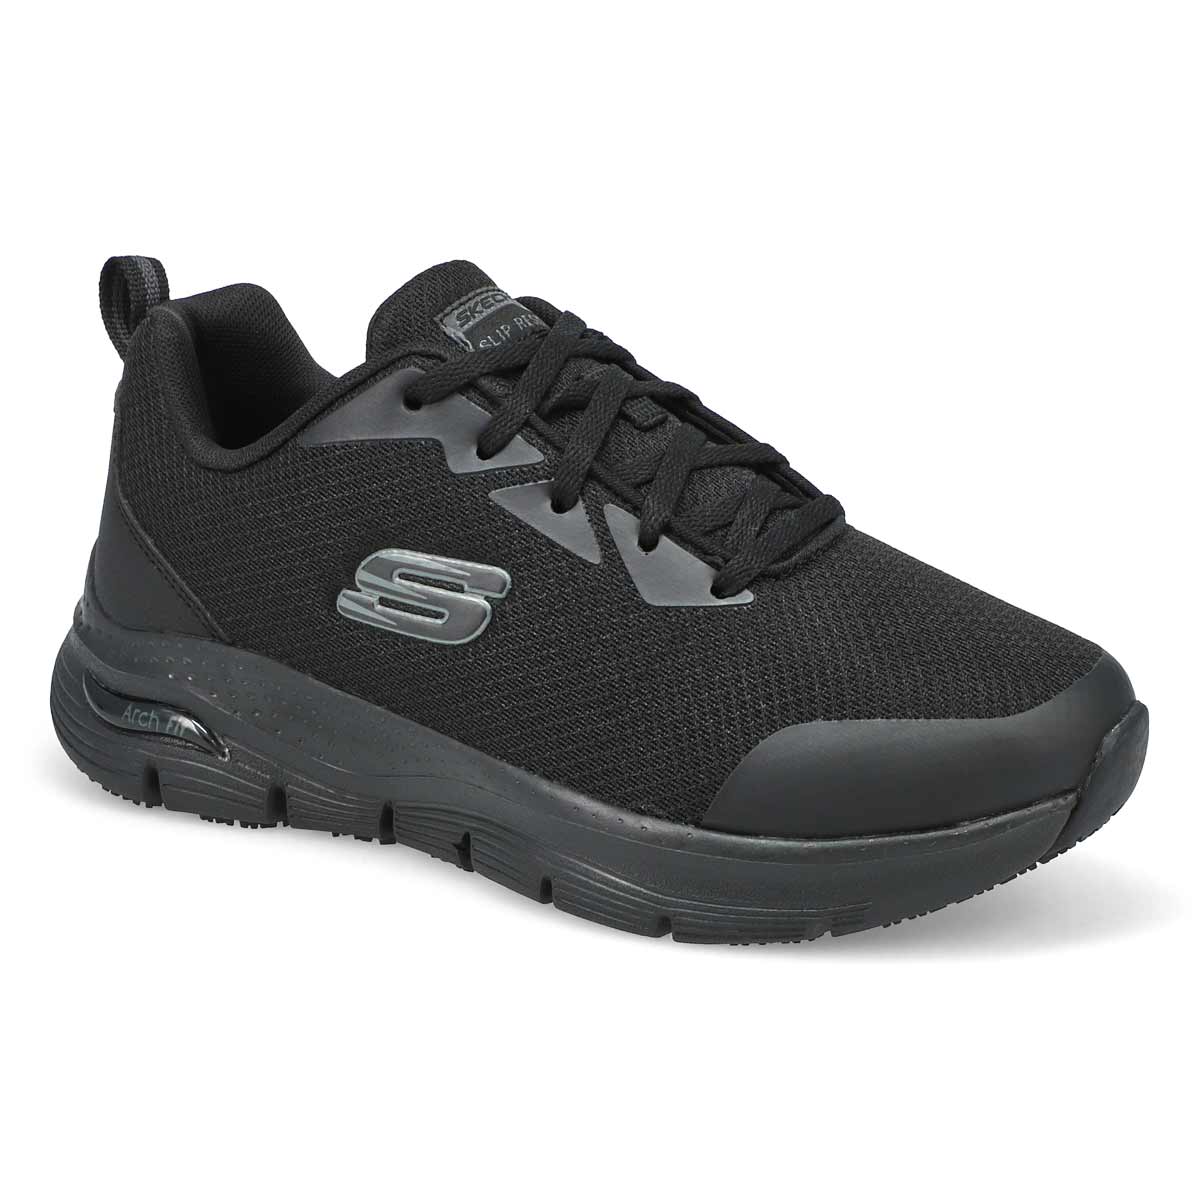 Arch Fit® by Skechers: The Benefits of Arch Support